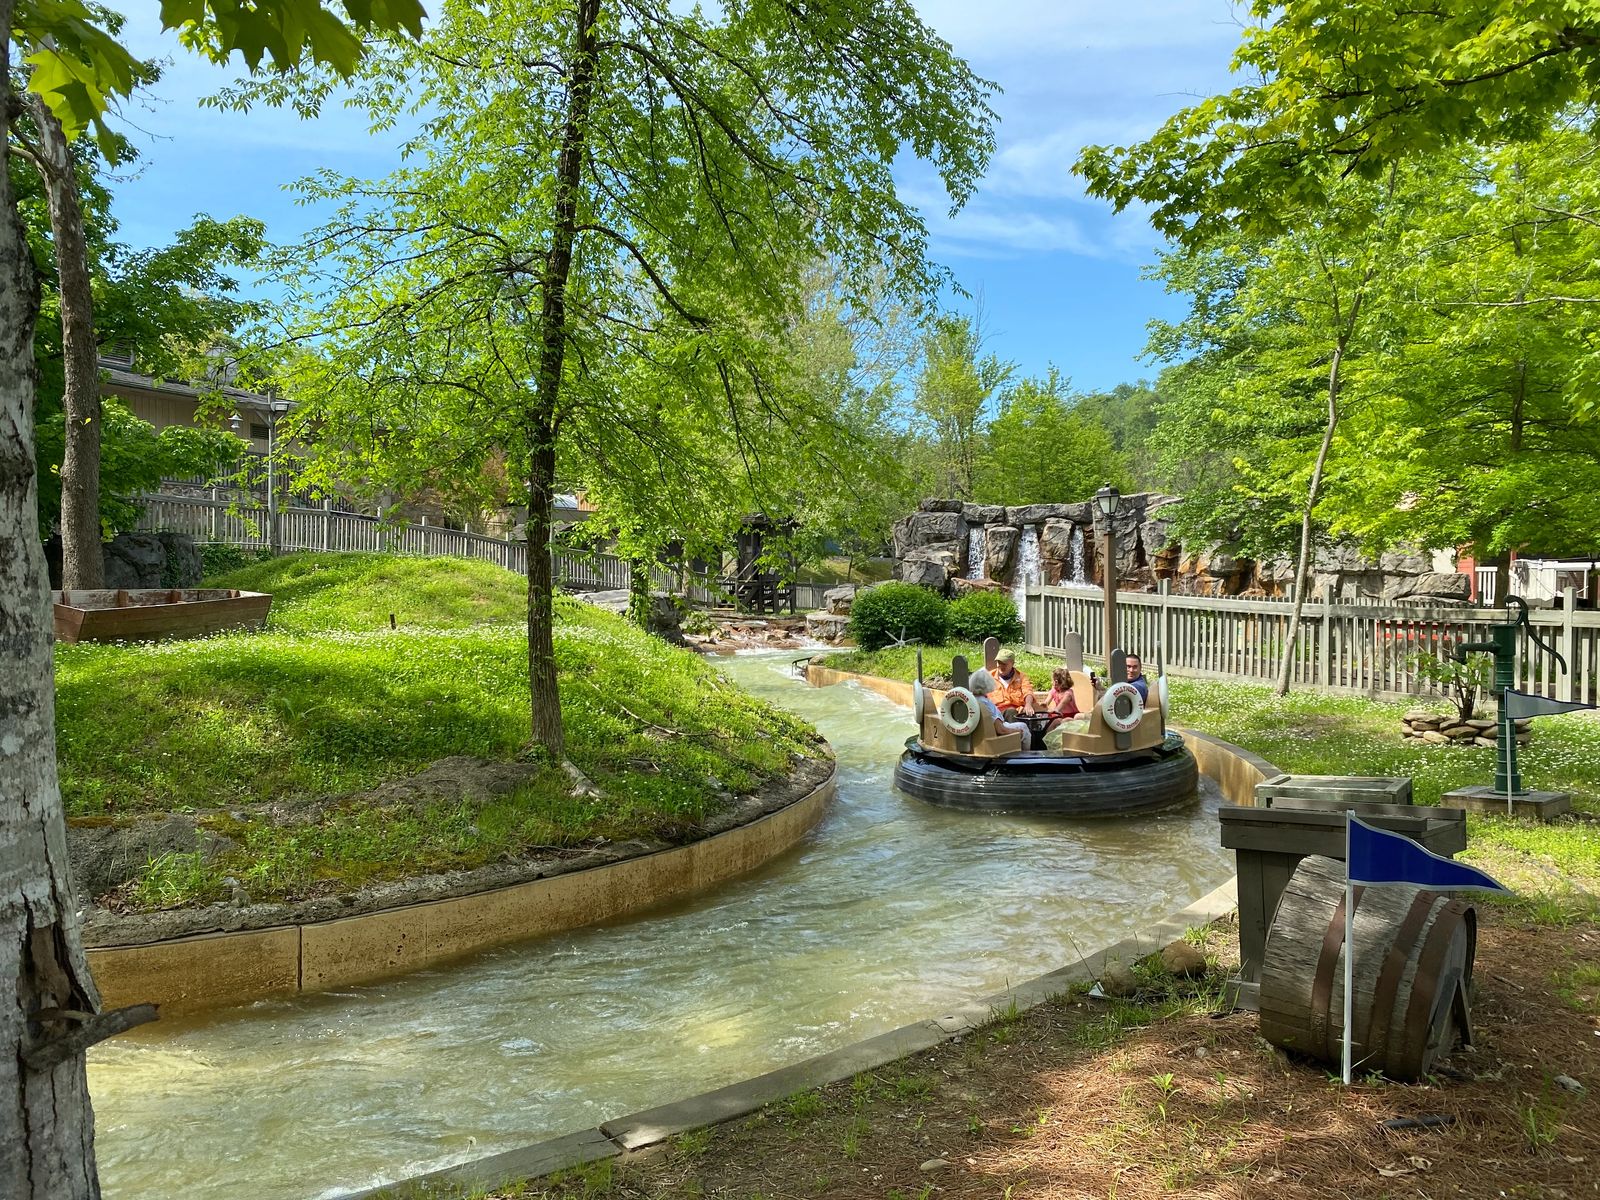 Guide to Dollywood, a family floats along a winding river ride